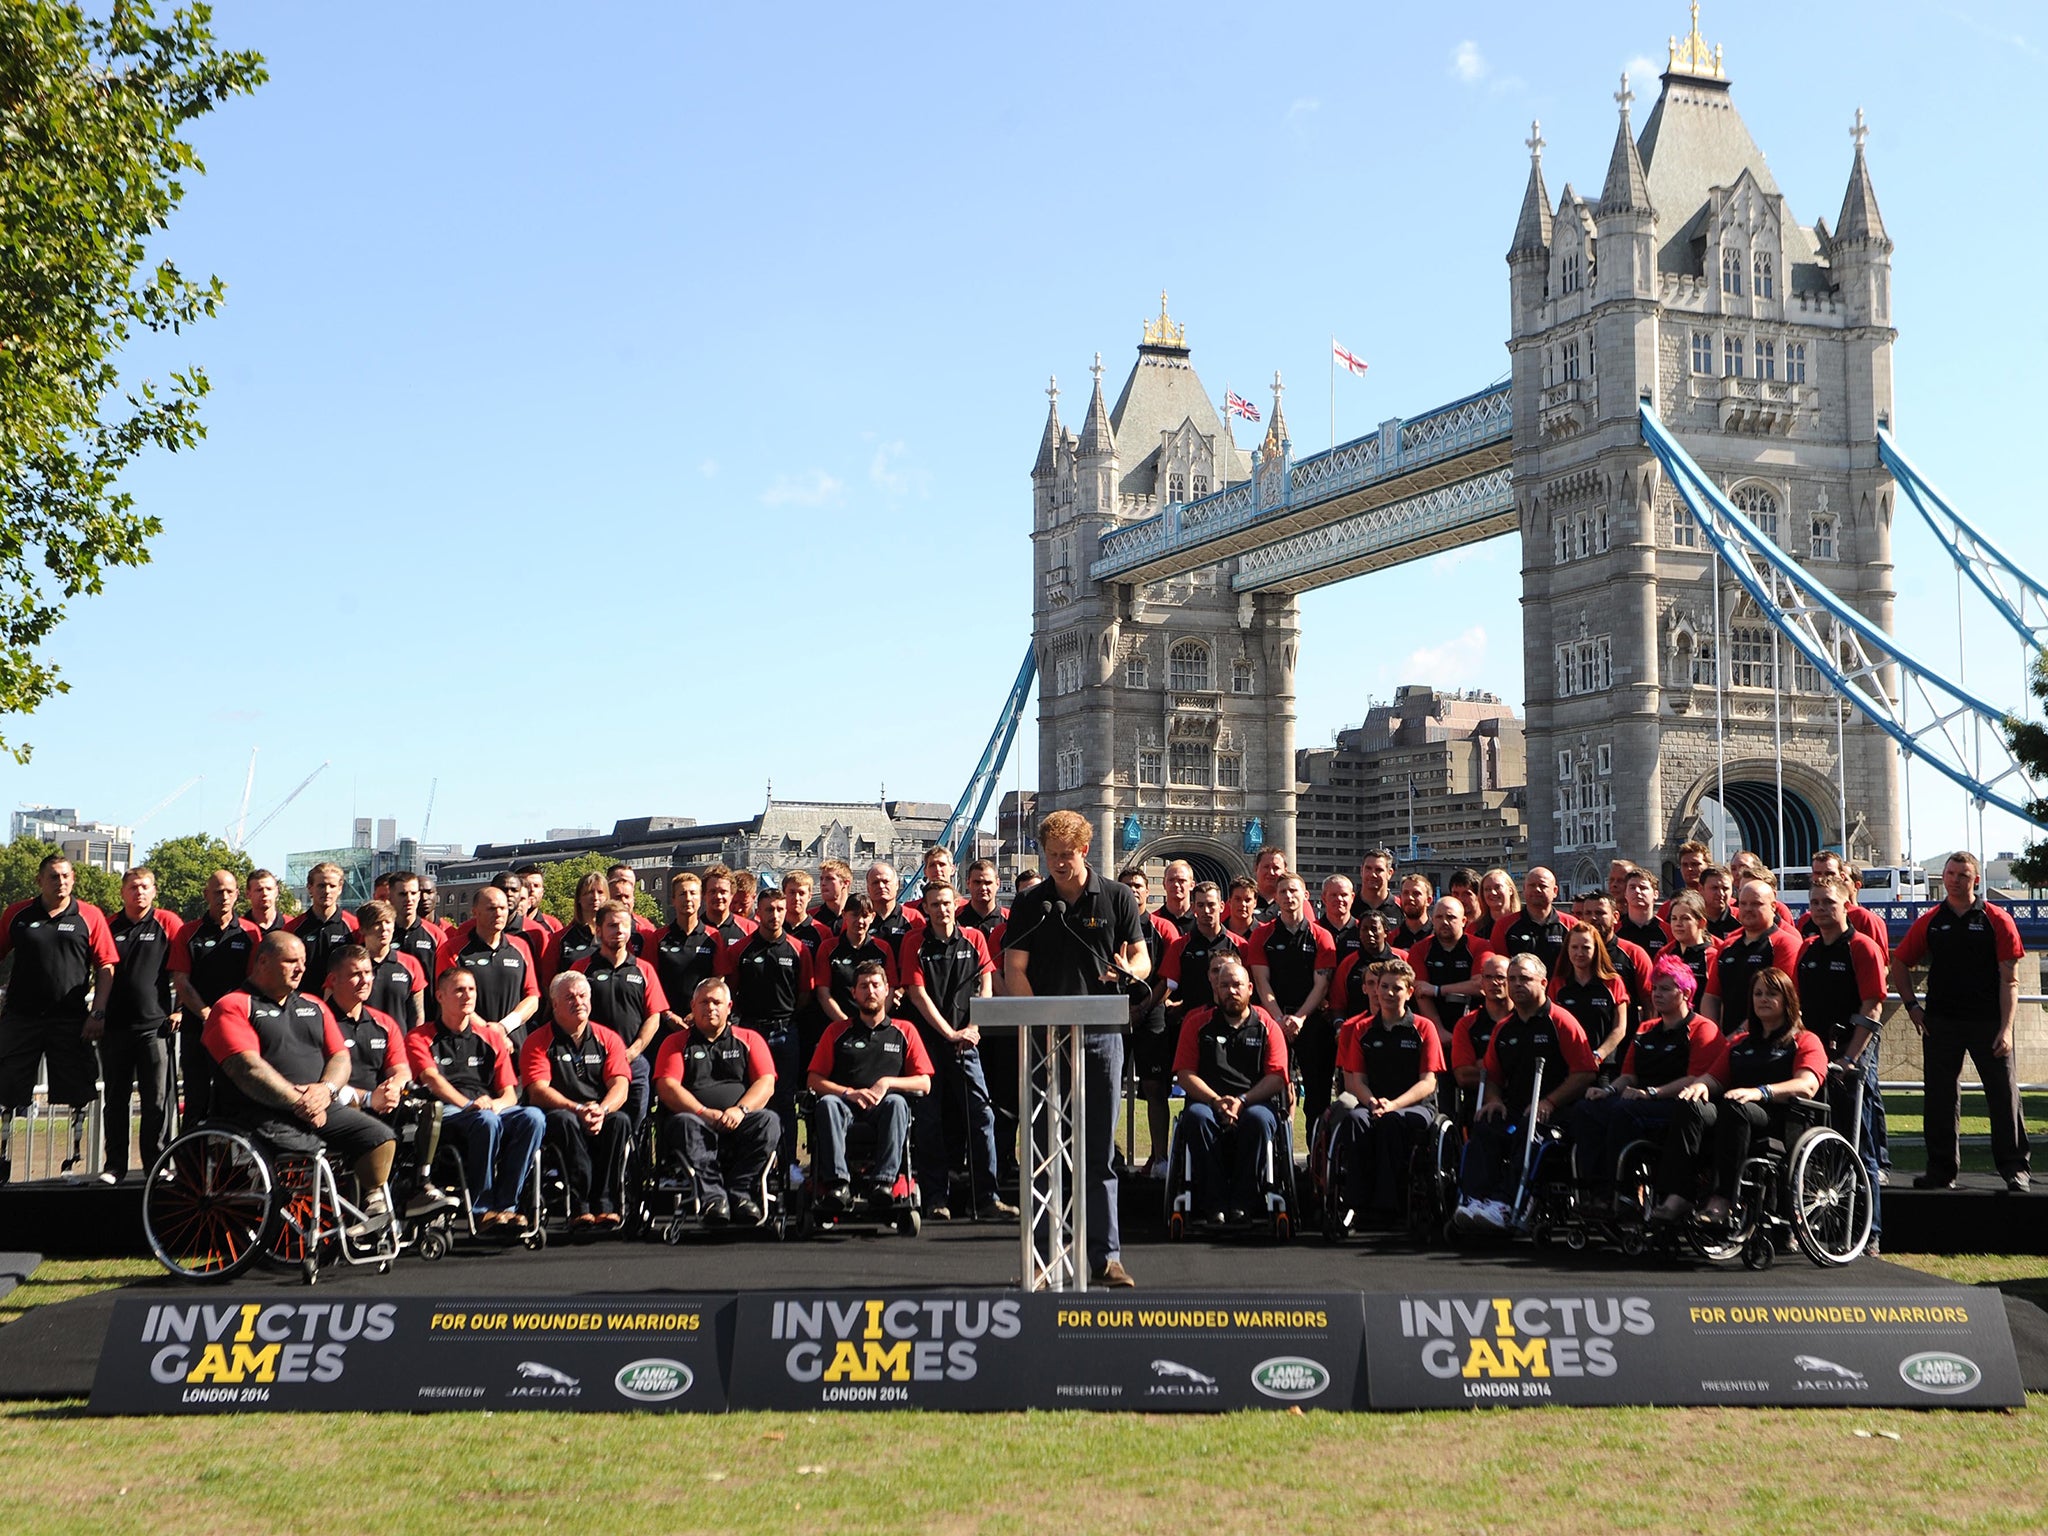 Prince Harry makes a speech as he unveils the British Armed Forces Team For The Invictus Games at Potters Field Park in London